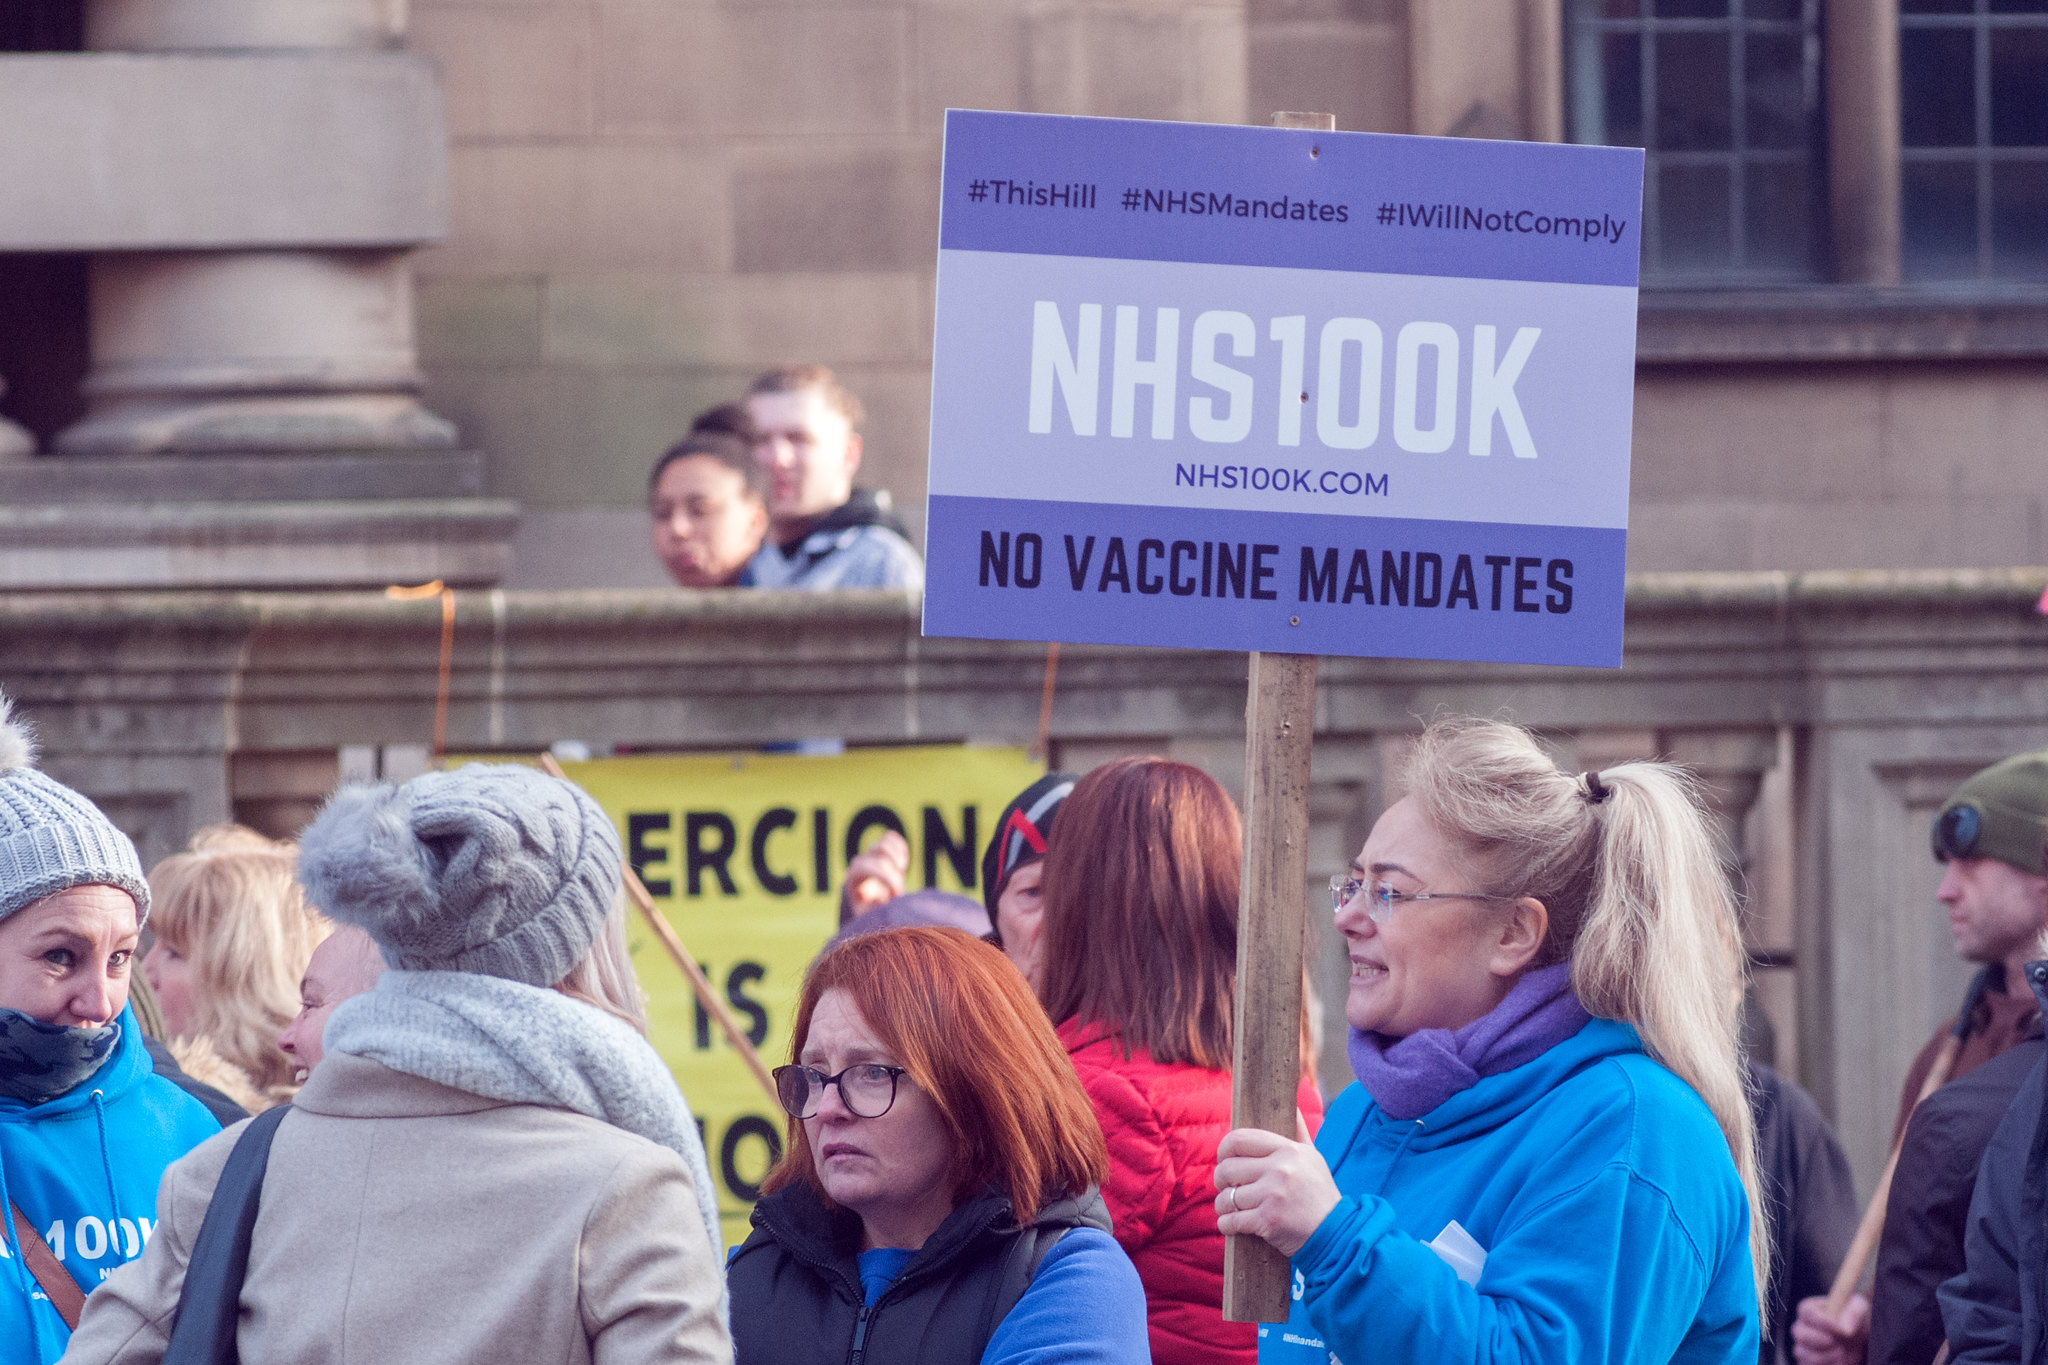 NHS Staff protest vaccinations in Sheffield. A sign reads "no vaccine mandates"